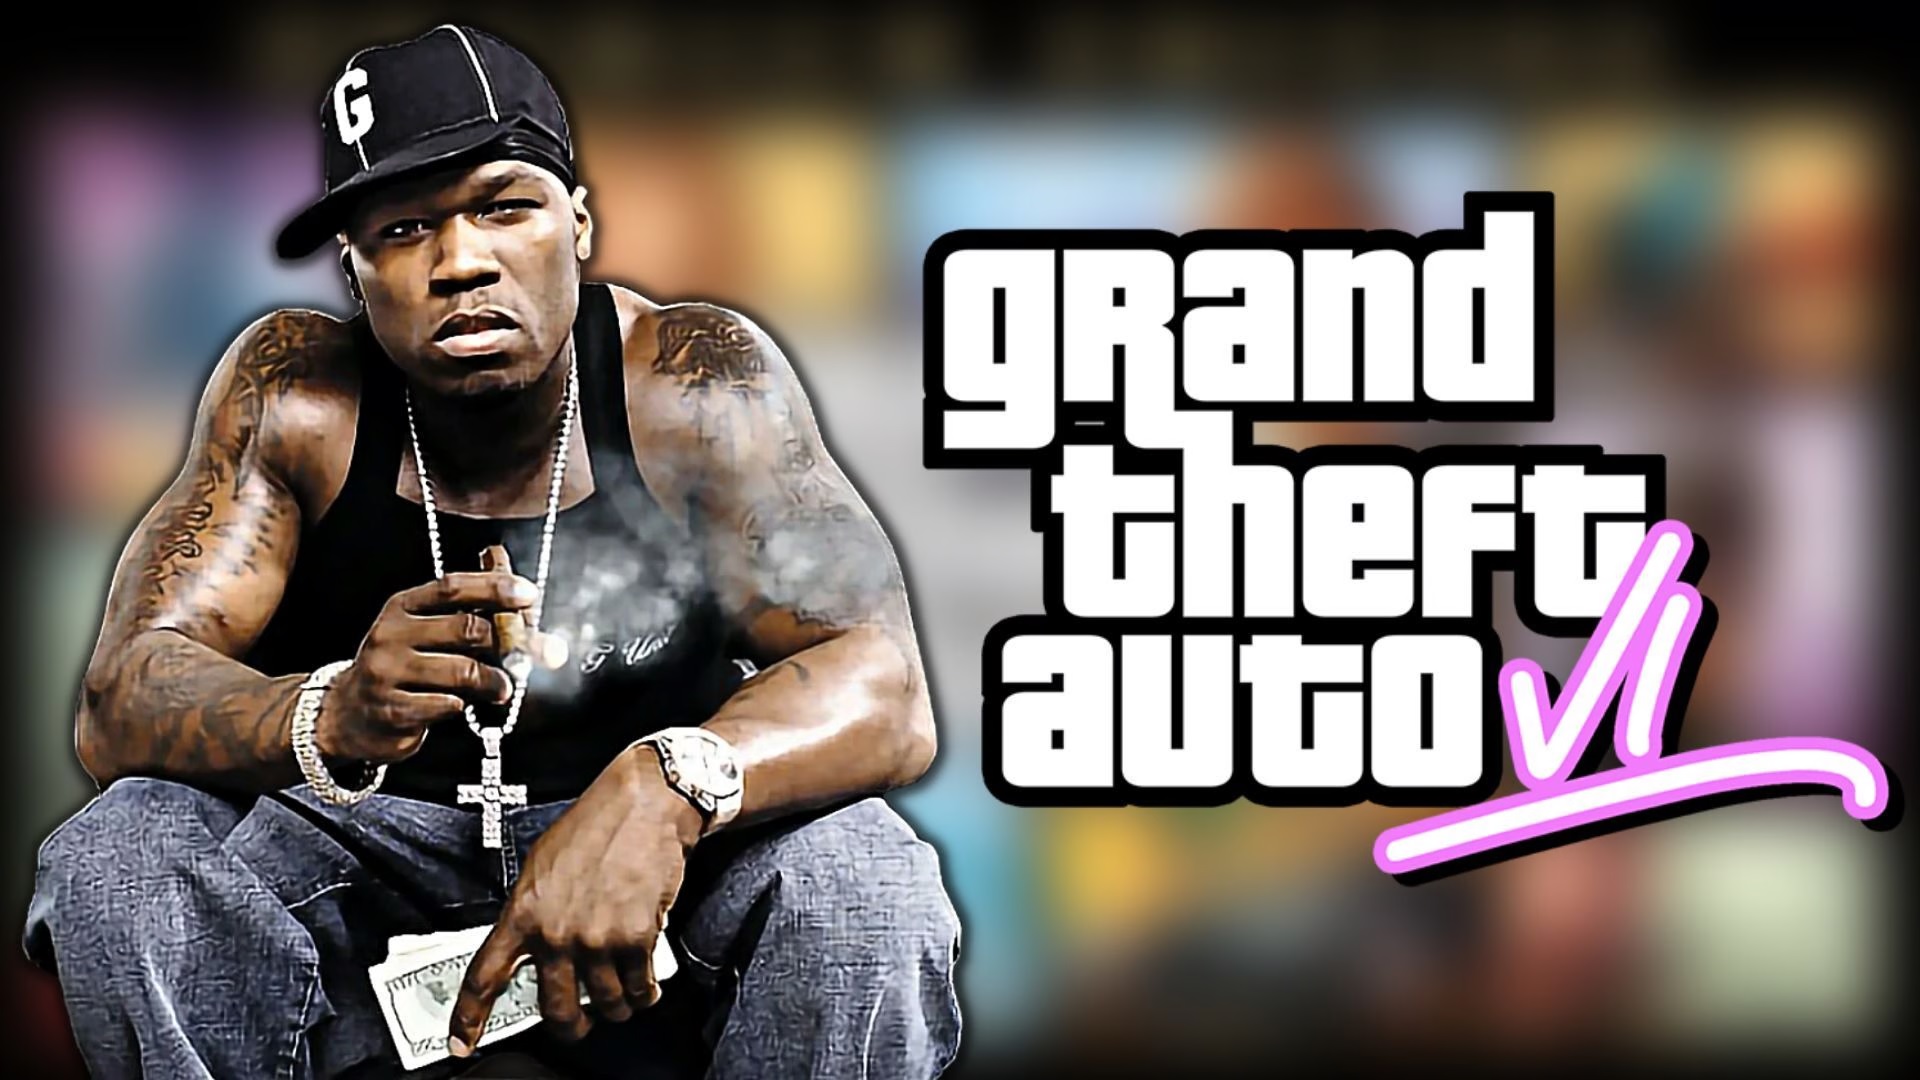 50 Cent posts image of Vice City and fans go crazy